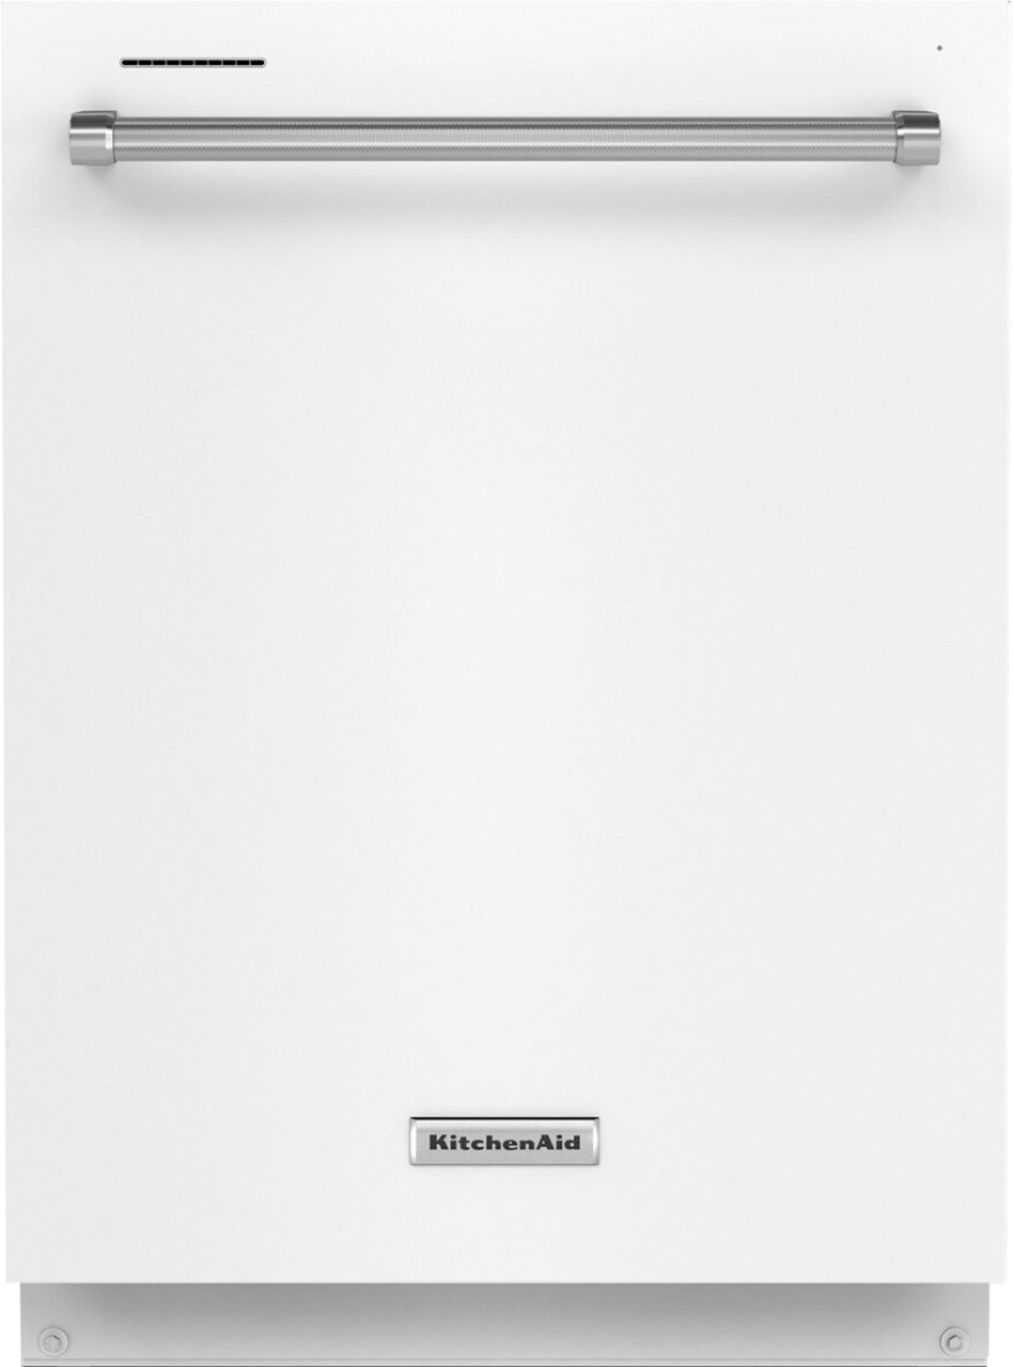 KitchenAid - 24" Top Control Built-In Dishwasher with Stainless Steel Tub, ProWash Cycle, 3rd Rack, 39 dBA - White